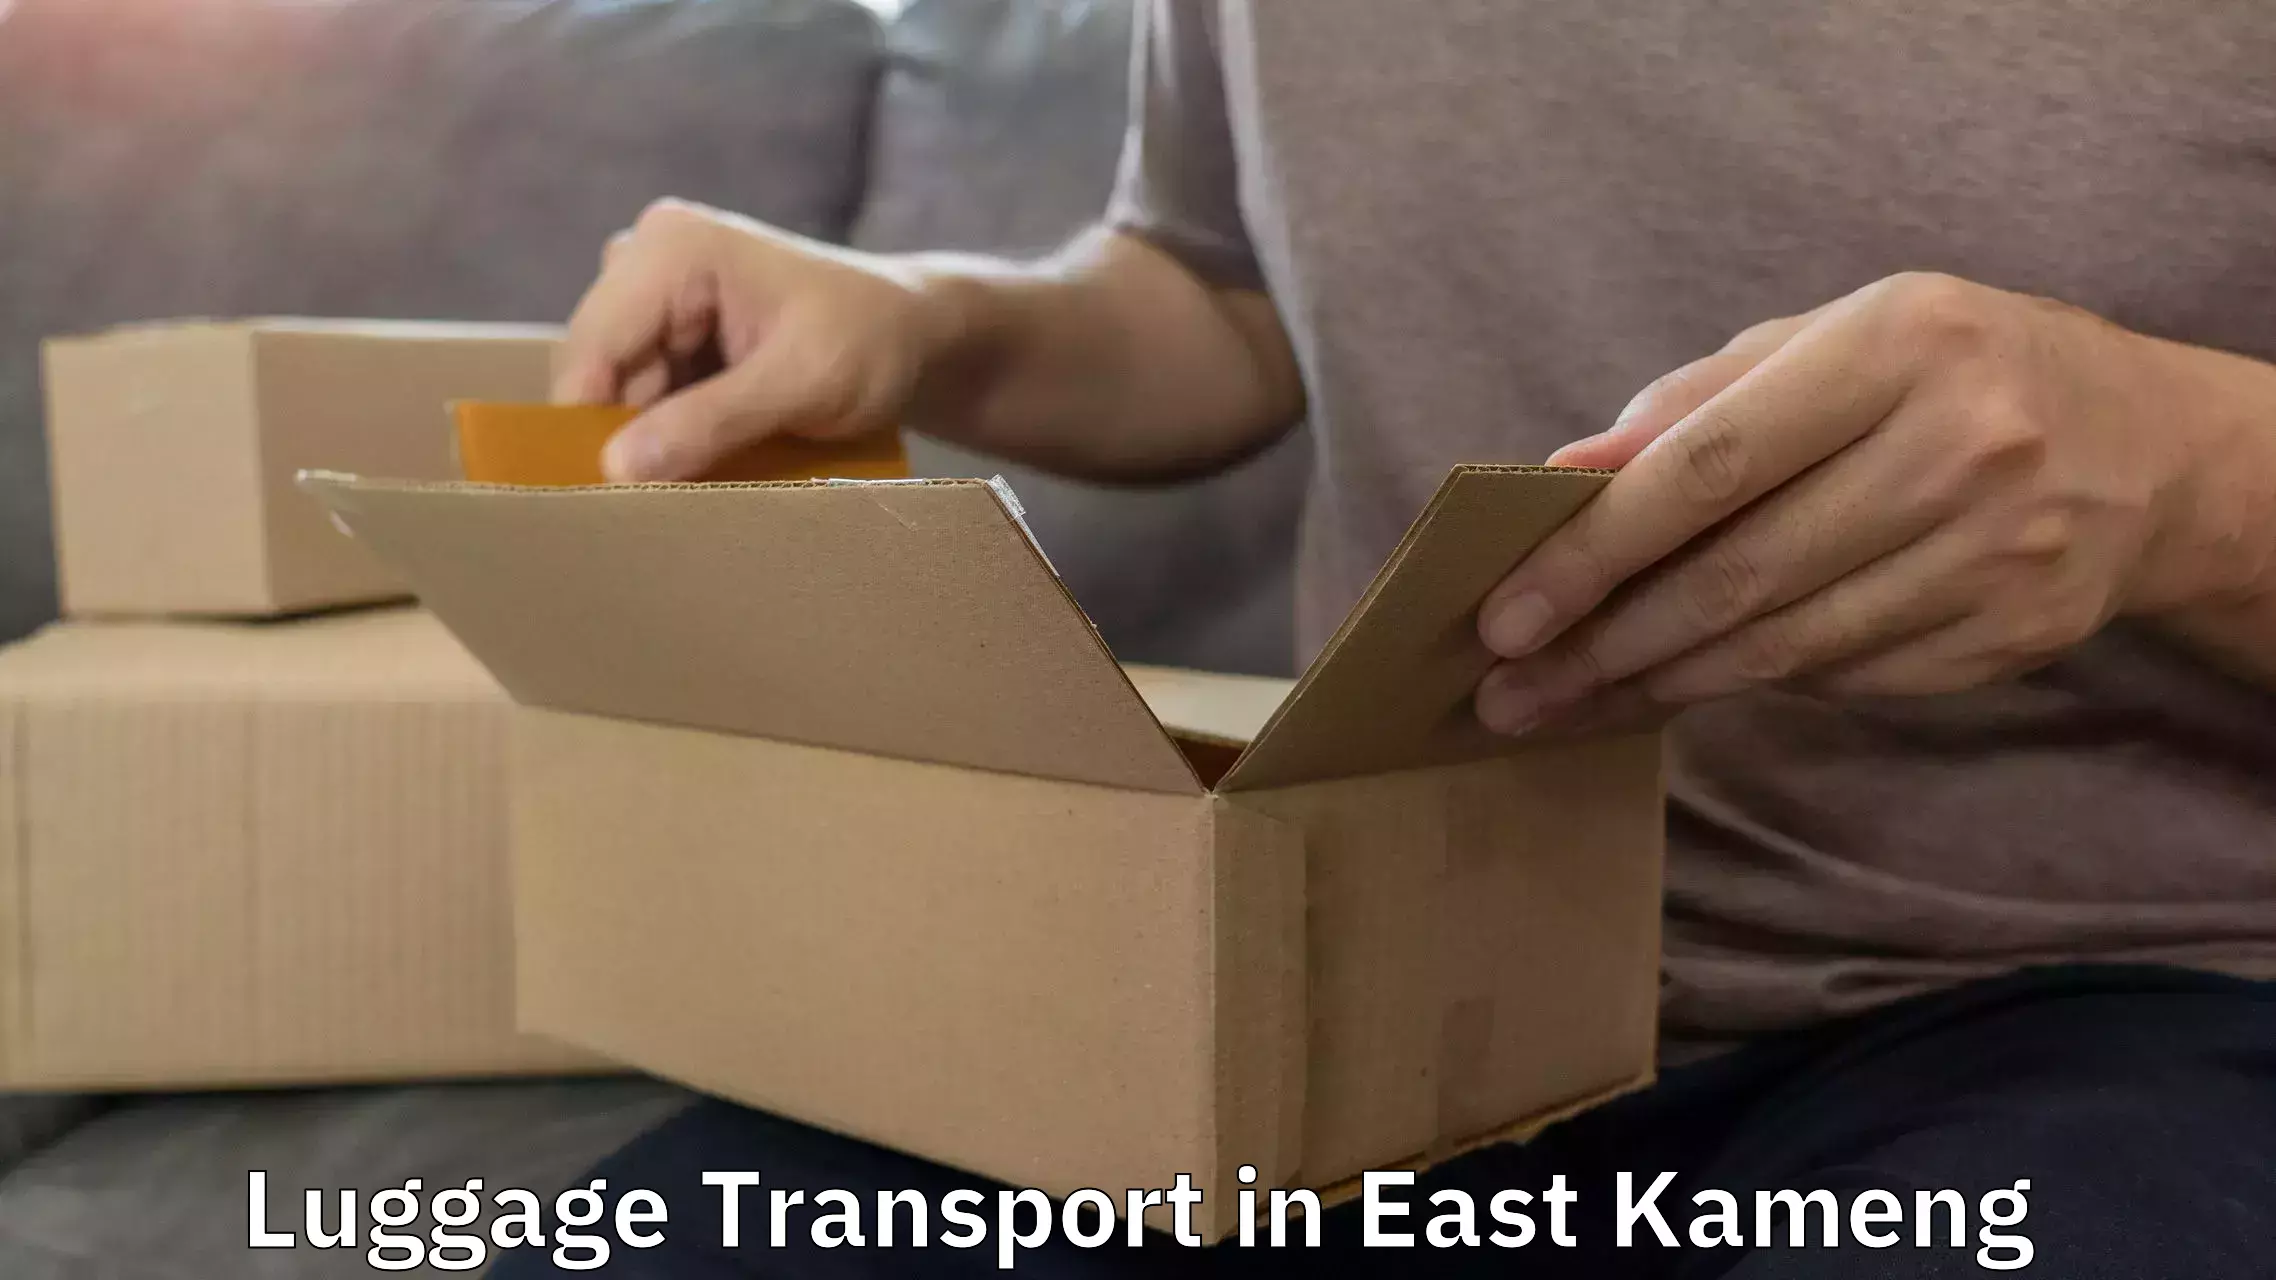 Luggage dispatch service in East Kameng